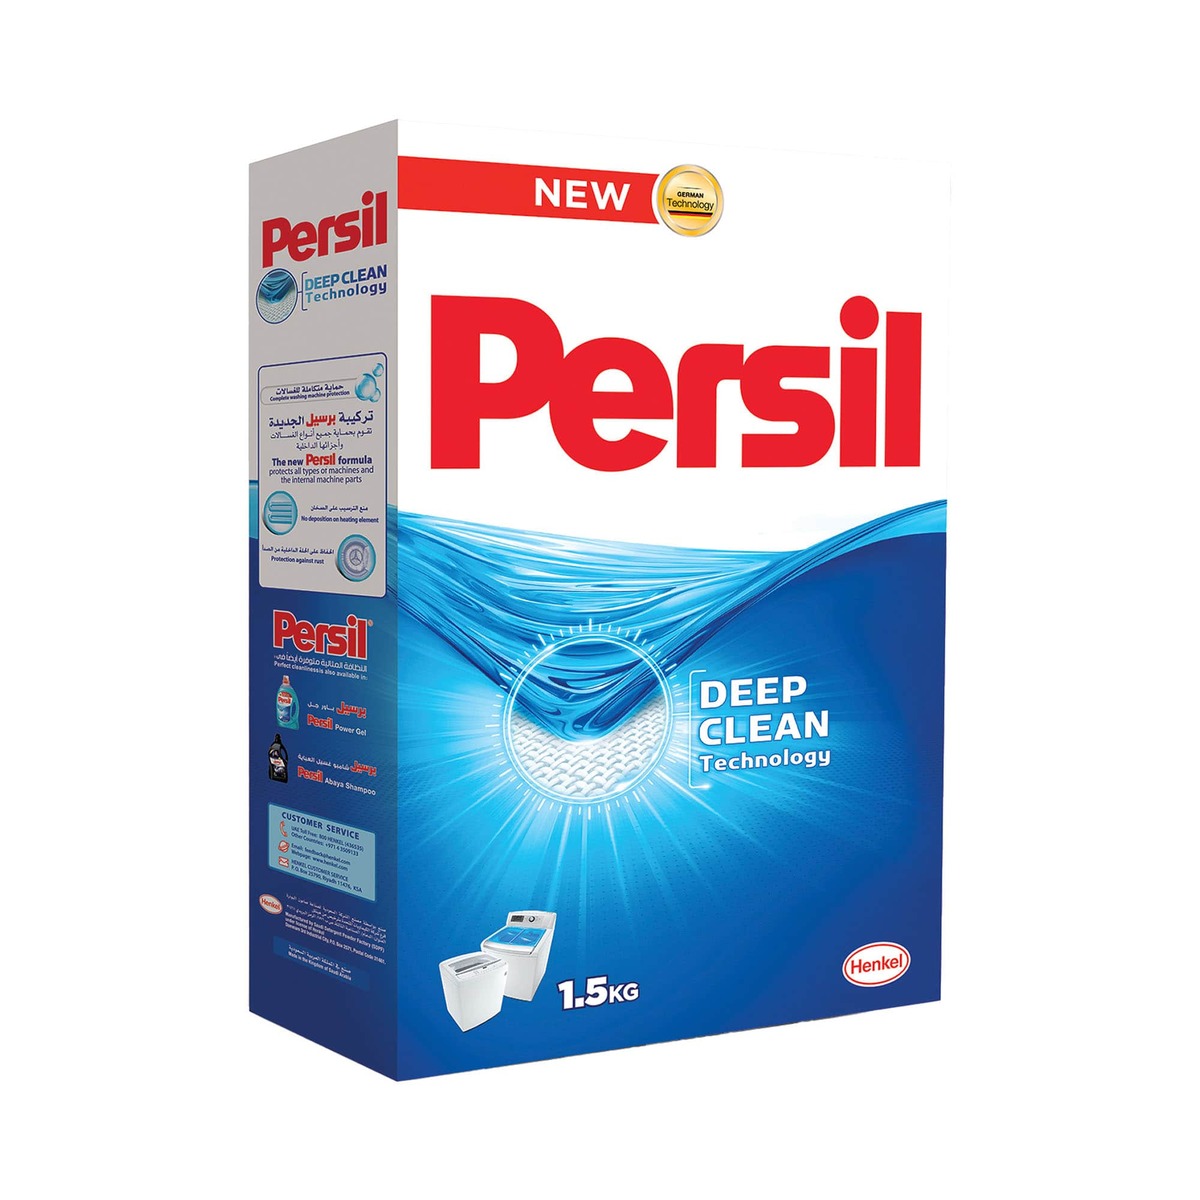 Persil Powder Laundry Detergent For Top Loading Washing Machines 1.5 kg